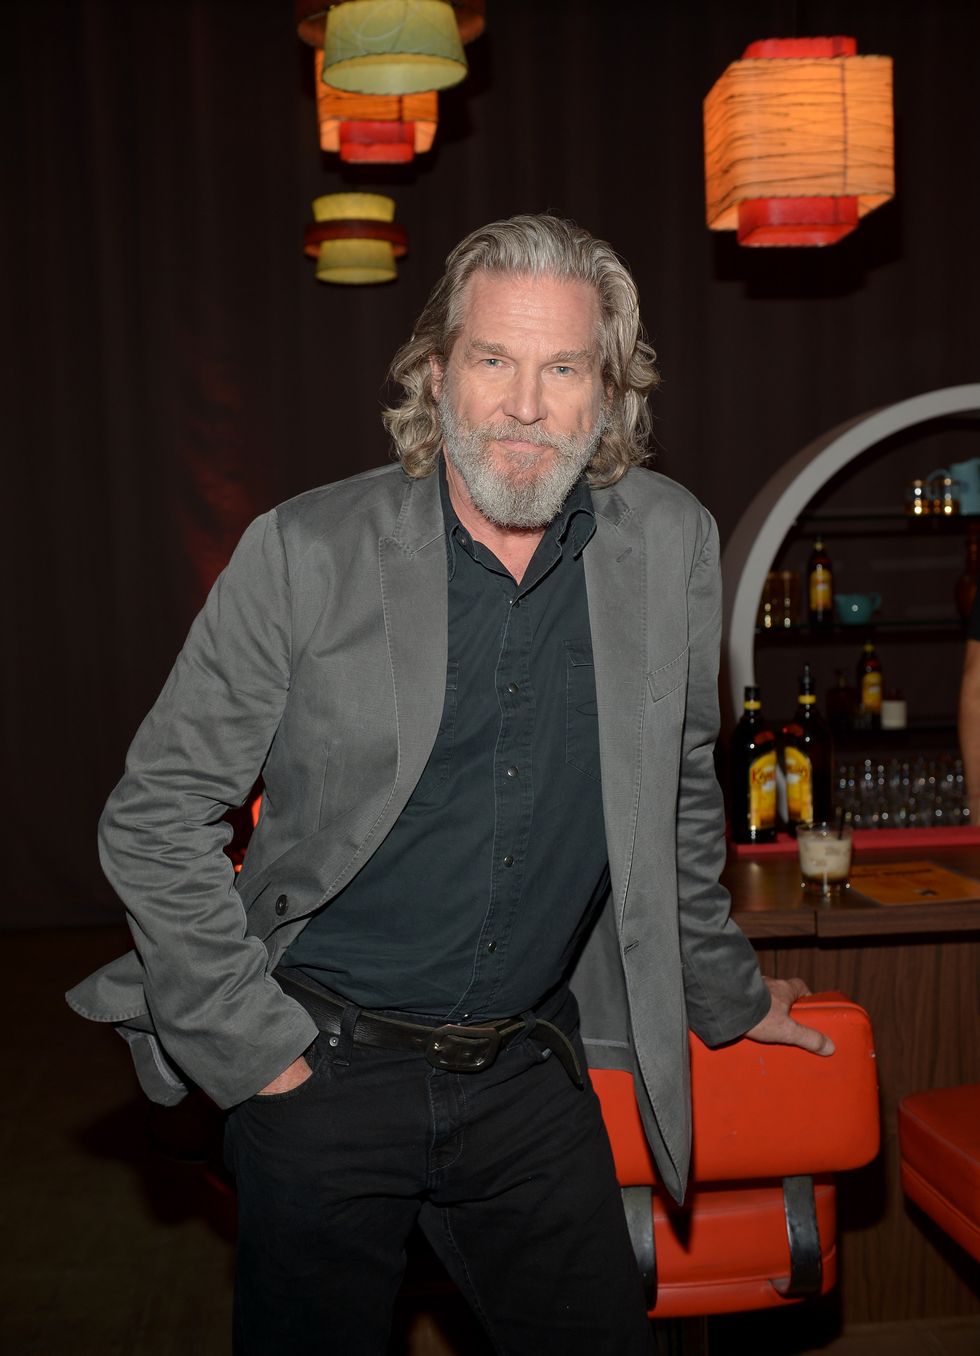 Jeff Bridges Finds His Cancer Is in Remission